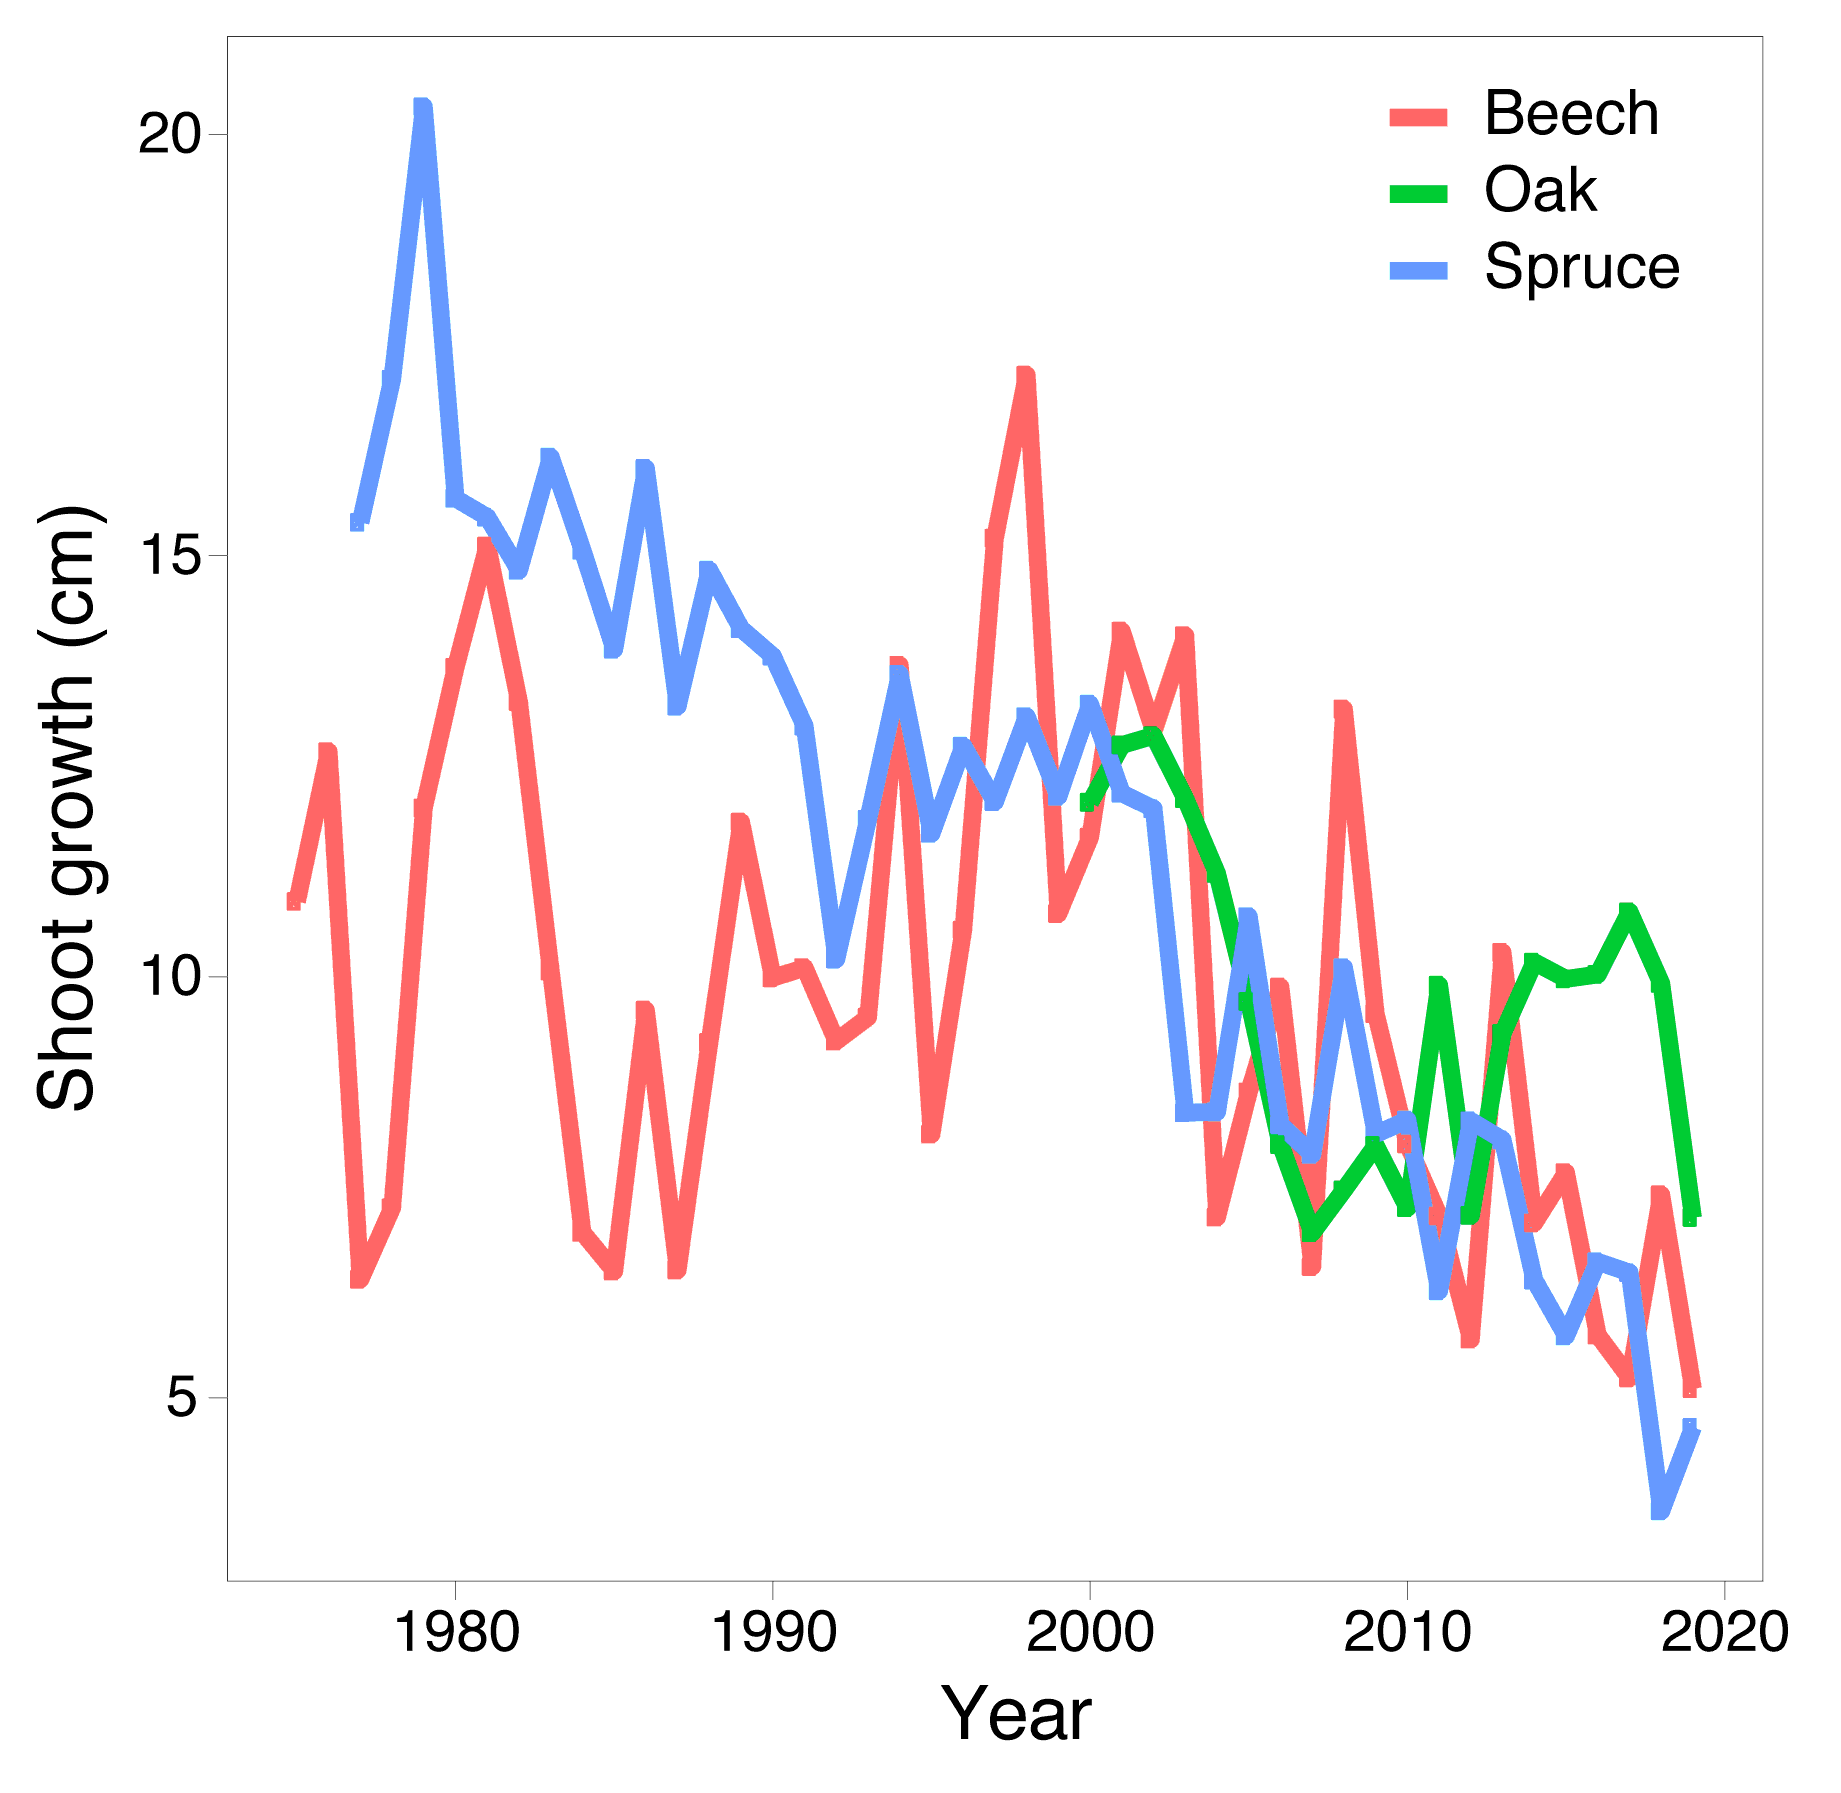 Shoot growth in beech and spruce